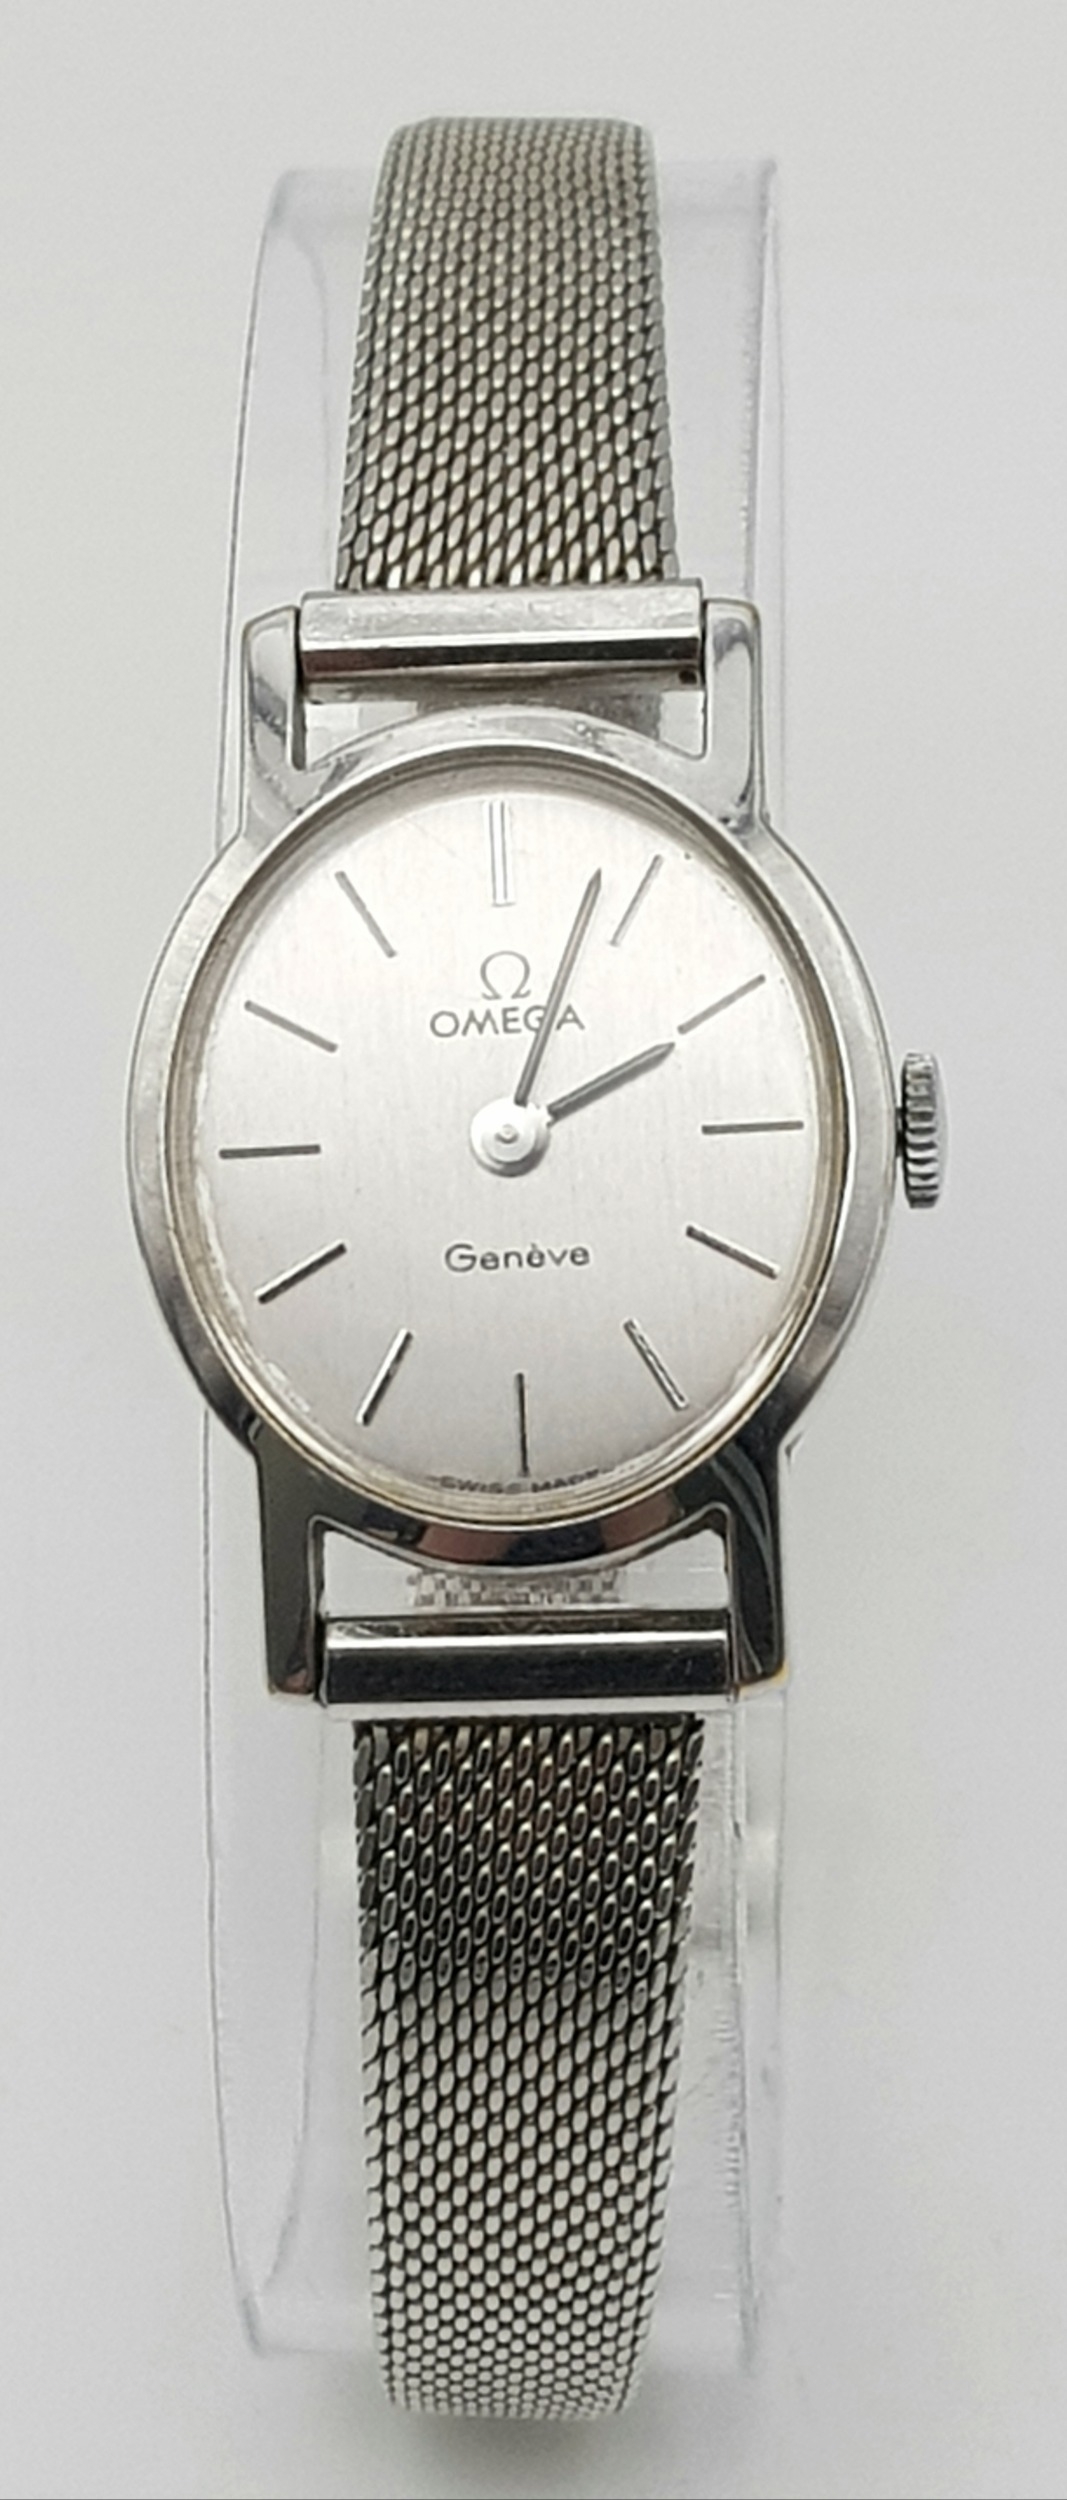 A Classic Omega Geneve Quartz Ladies Watch. Stainless steel bracelet and case - 21mm. Silver tone - Image 3 of 7